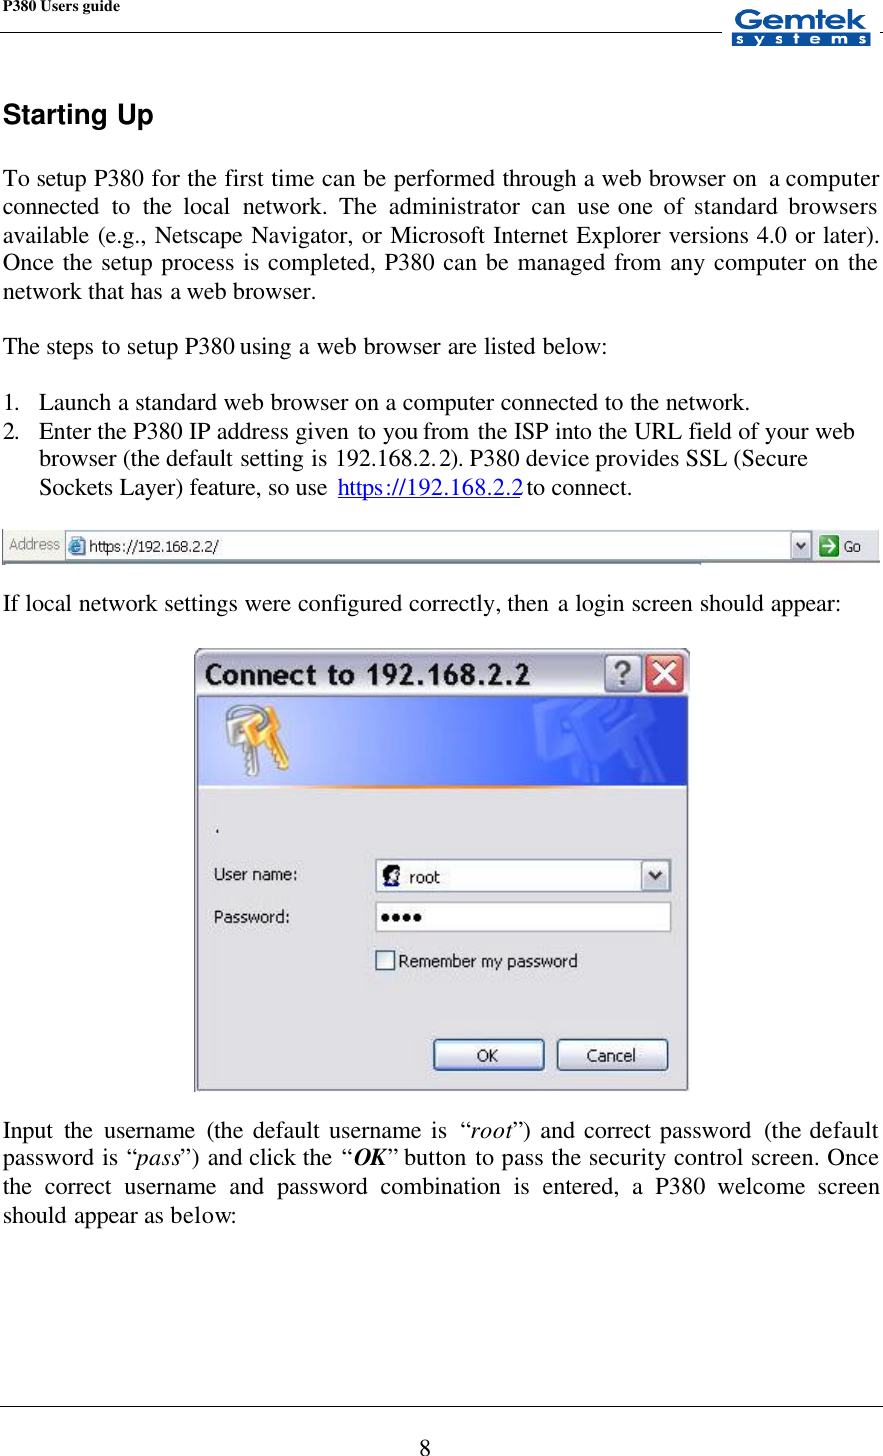 P380 Users guide            8 Starting Up  To setup P380 for the first time can be performed through a web browser on  a computer connected to the local network. The administrator can use one of standard browsers available (e.g., Netscape Navigator, or Microsoft Internet Explorer versions 4.0 or later). Once the setup process is completed, P380 can be managed from any computer on the network that has a  web browser.  The steps to setup P380 using a web browser are listed below:  1. Launch a standard web browser on a computer connected to the network. 2. Enter the P380 IP address given to you from  the ISP into the URL field of your web browser (the default setting is 192.168.2.2). P380 device provides SSL (Secure Sockets Layer) feature, so use  https://192.168.2.2 to connect.    If local network settings were configured correctly, then a login screen should appear:    Input the username (the default username is  “root”)  and correct password  (the default password is “pass”)  and click the “OK” button to pass the security control screen. Once the correct username and password combination is entered, a P380 welcome screen should appear as below:  